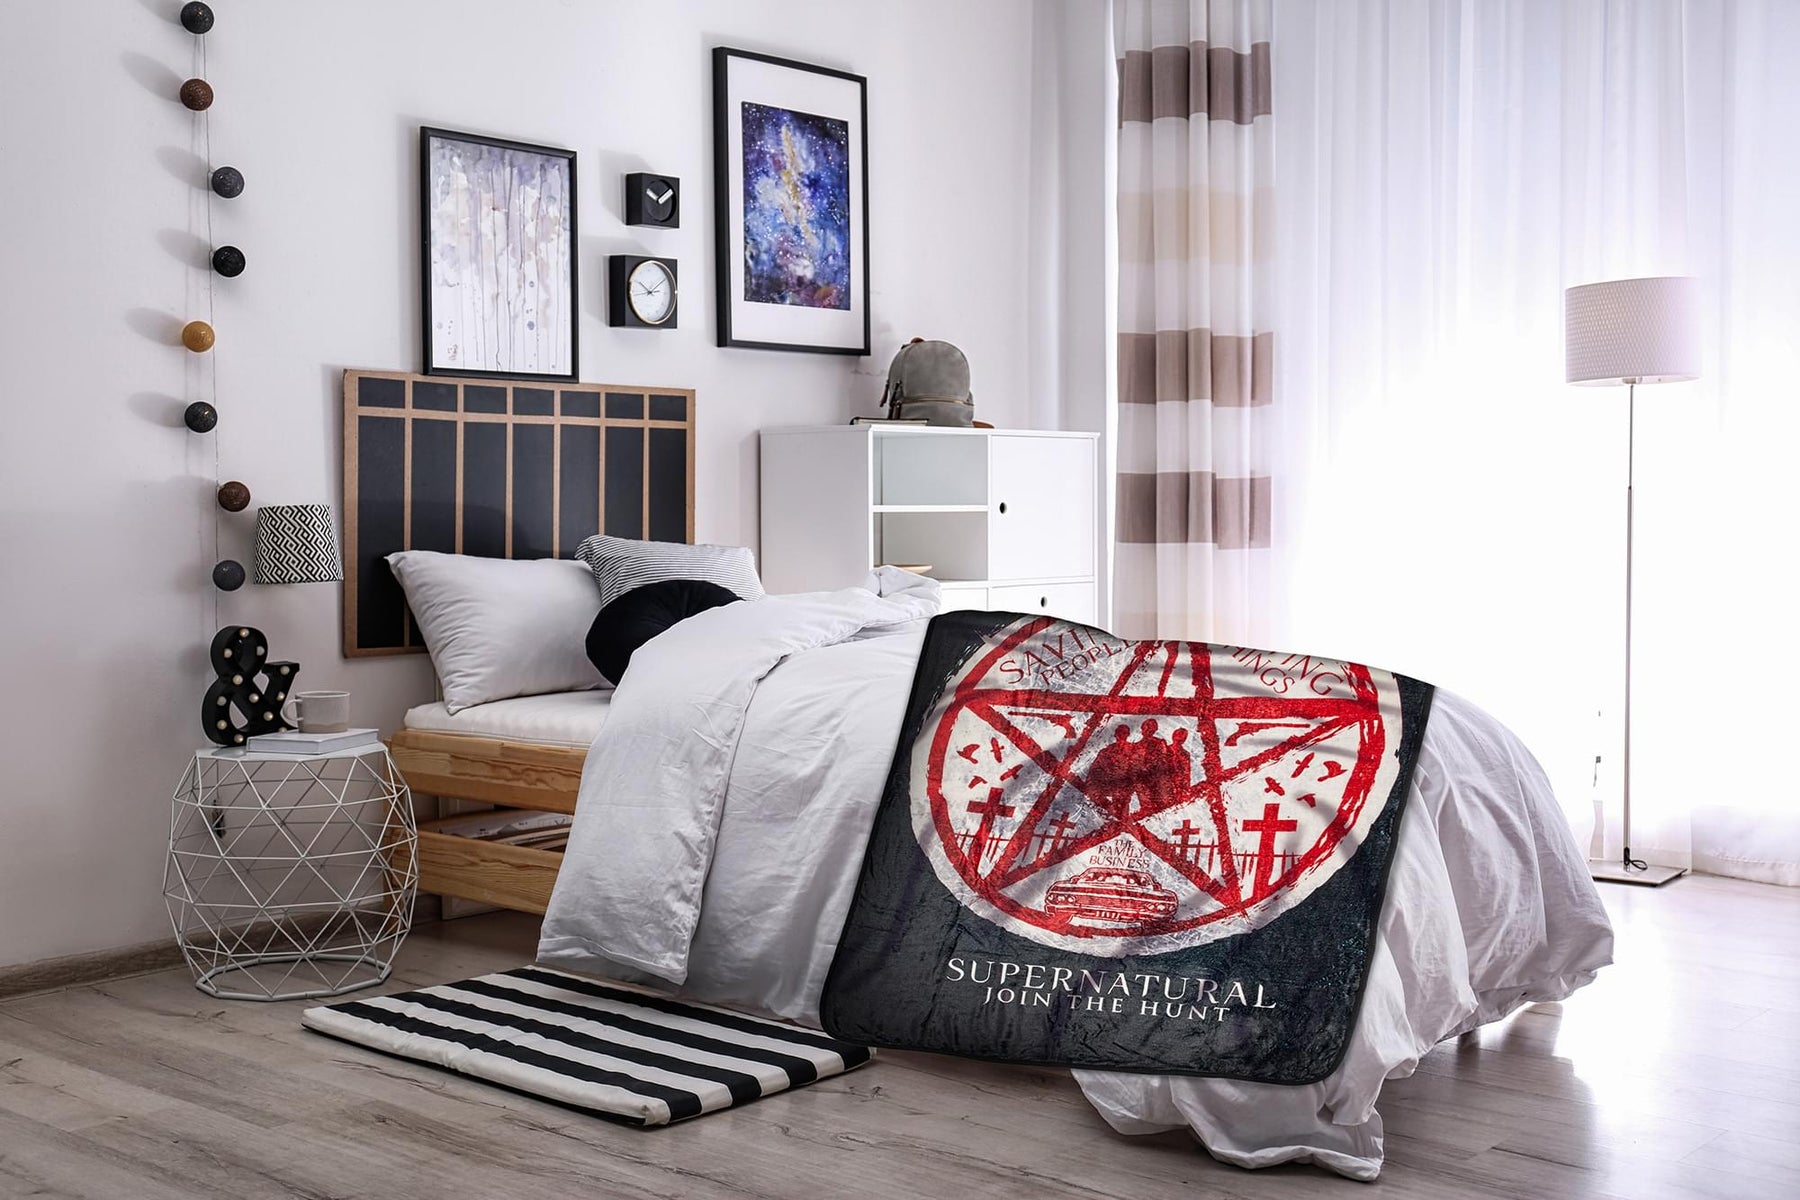 Supernatural Join The Hunt Fleece Throw Blanket - 45 x 60-Inches